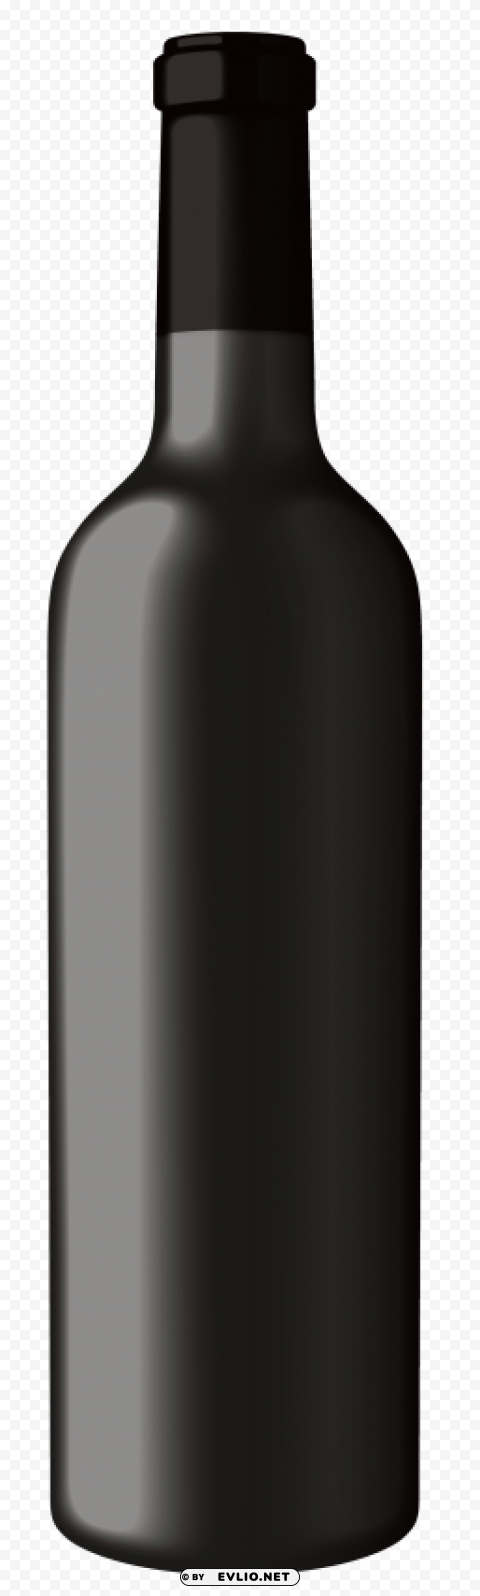 Black Wine Bottle PNG Images With No Fees